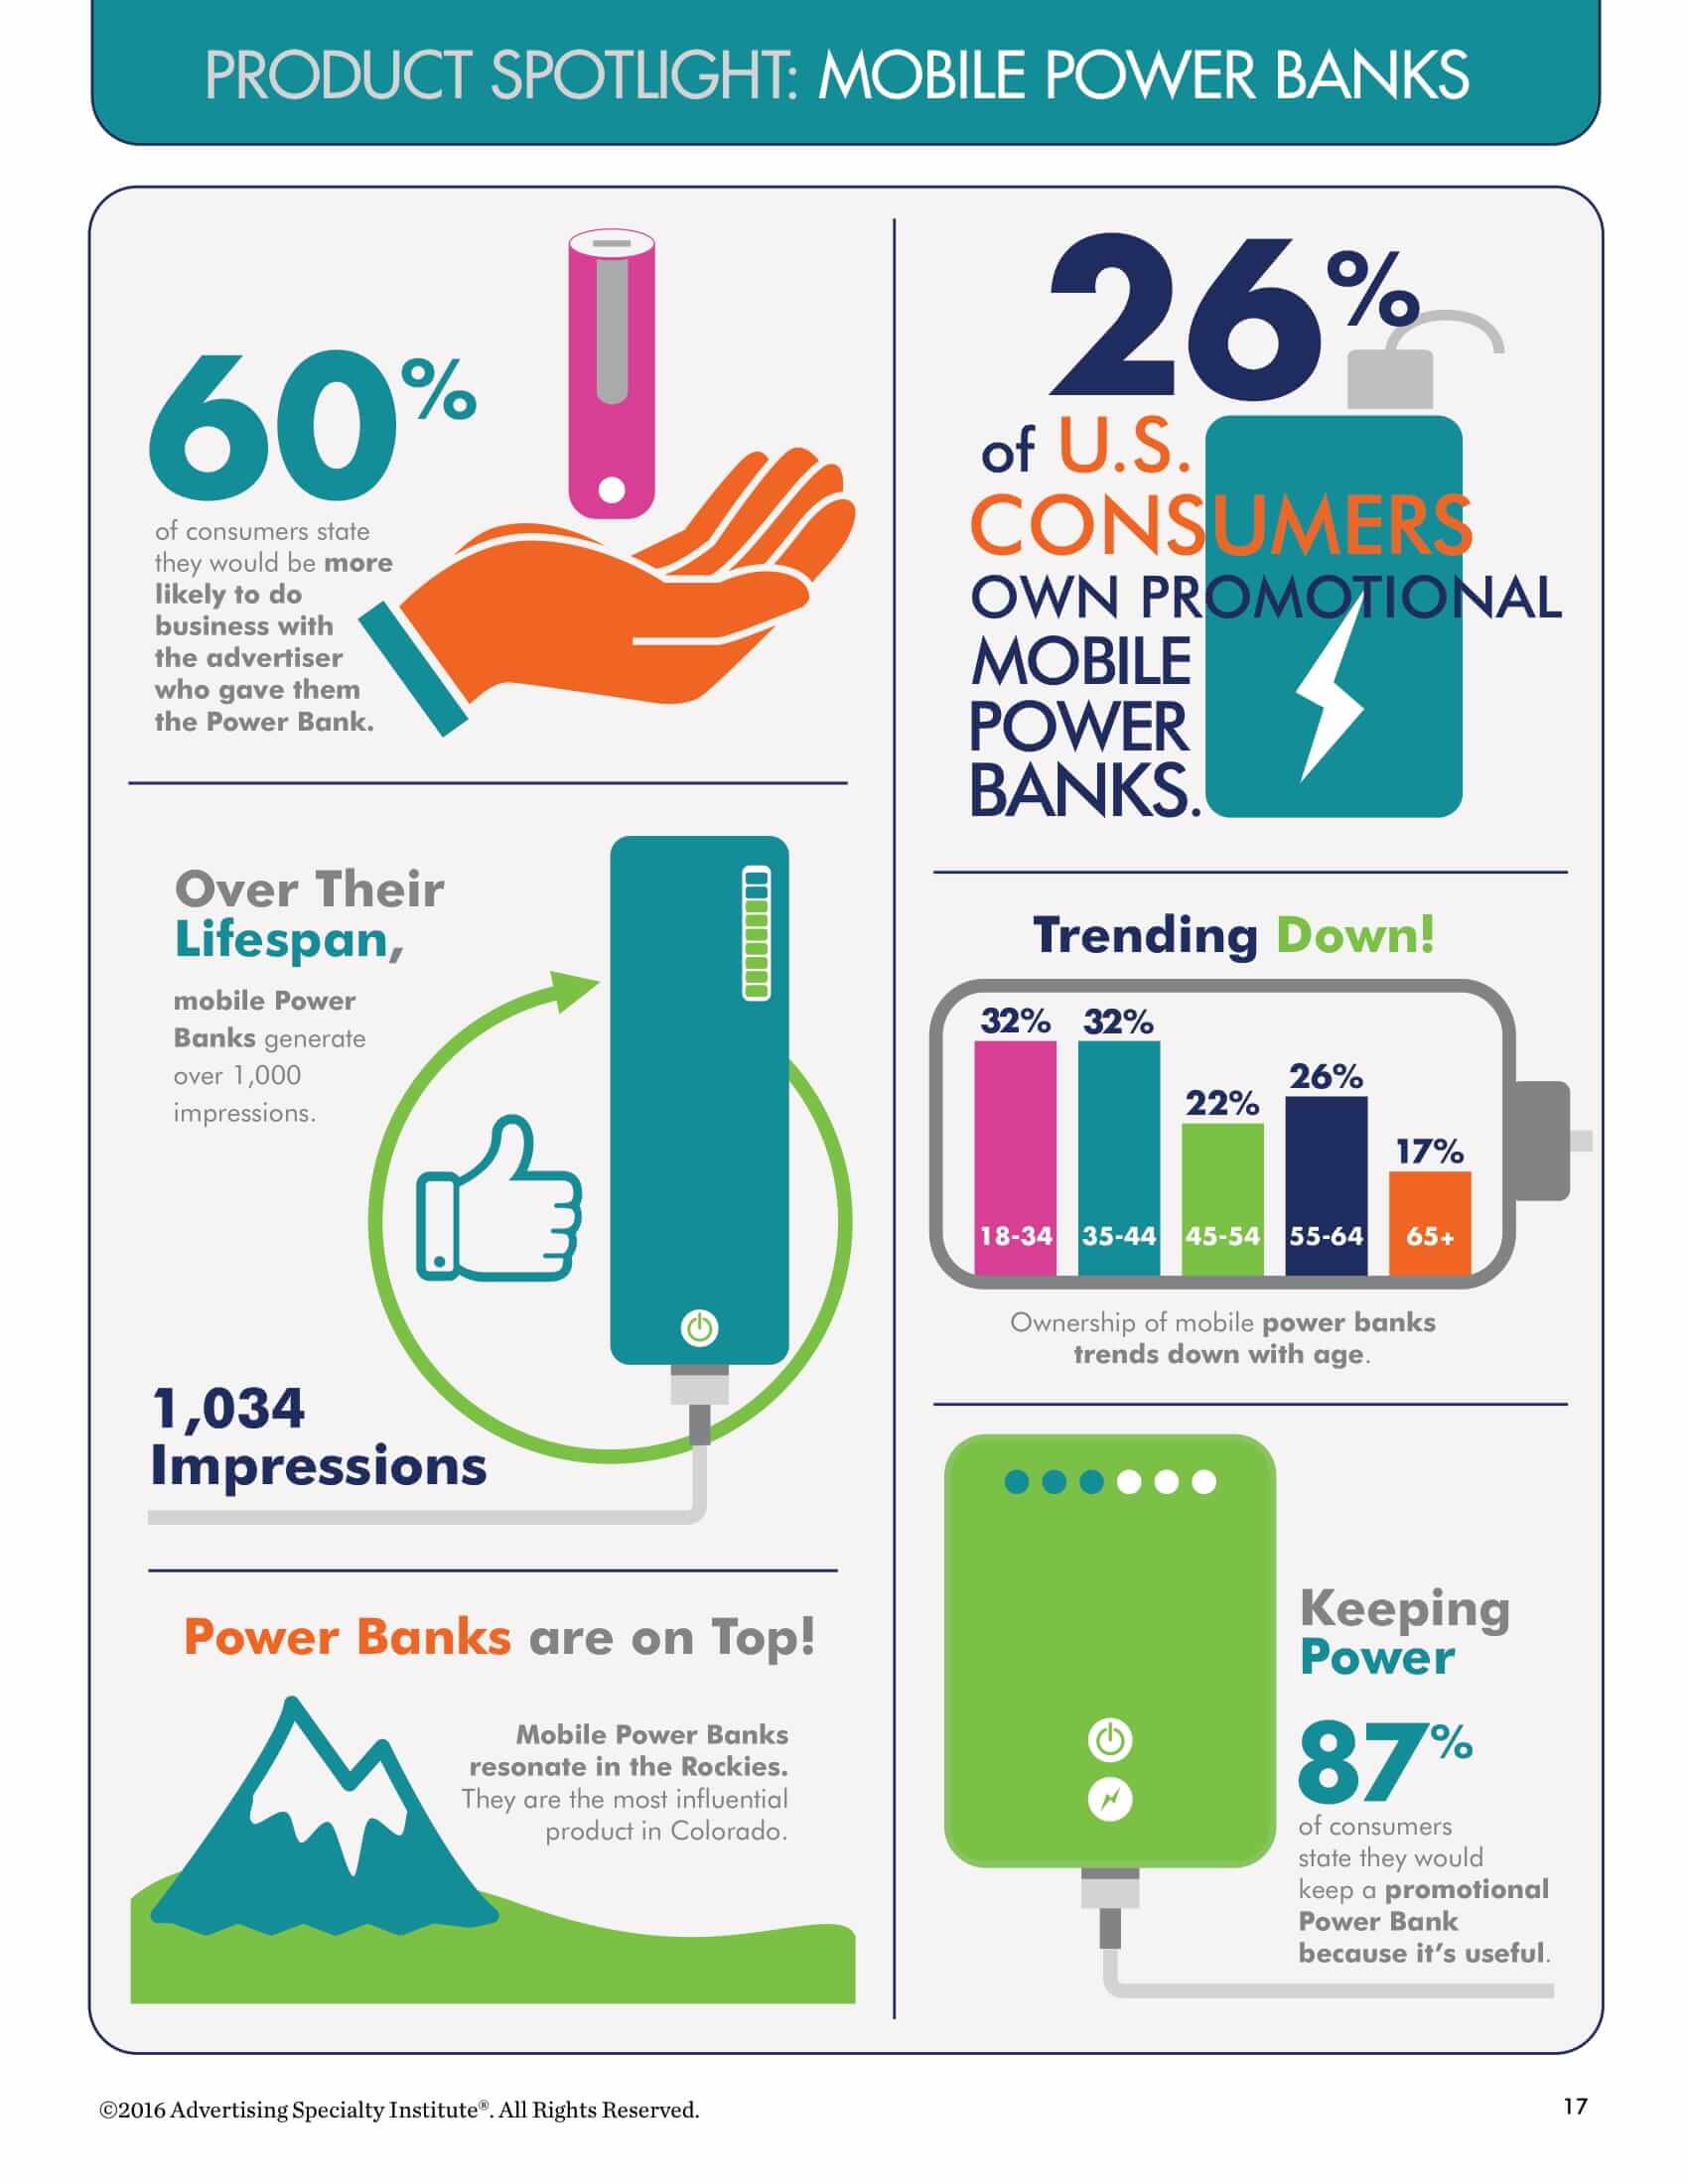 US Consumer Preference: Promotional Power Banks as Corporate Gifts